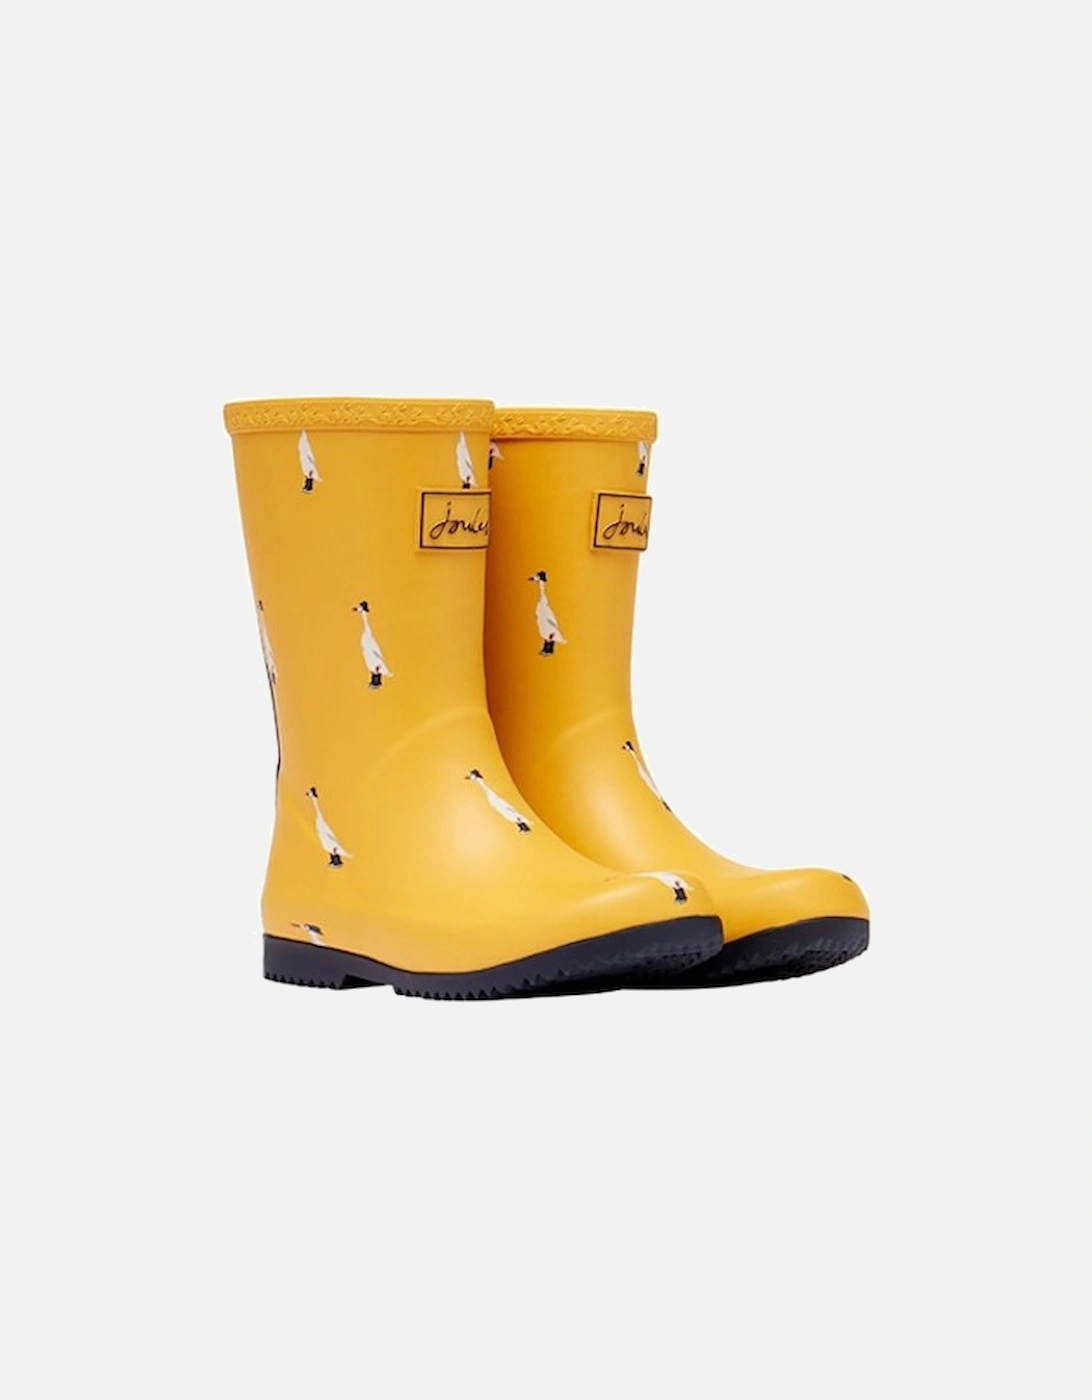 JNR Printed Roll Up Wellies Gold Ducks, 7 of 6